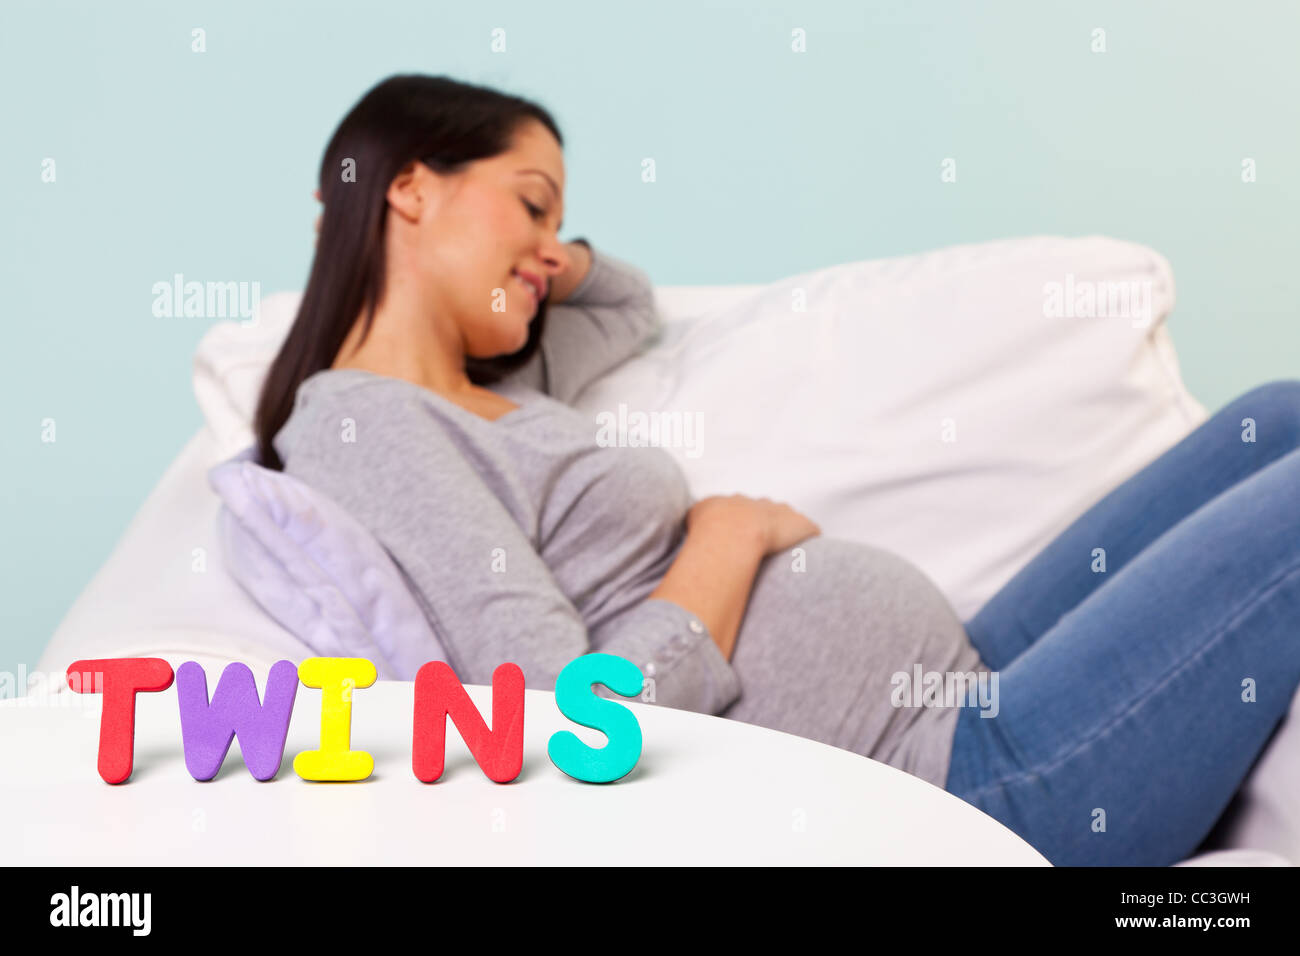 Photo of a pregnant woman at home sitting in an armchair, focus on the word TWINS on the table in front. Stock Photo